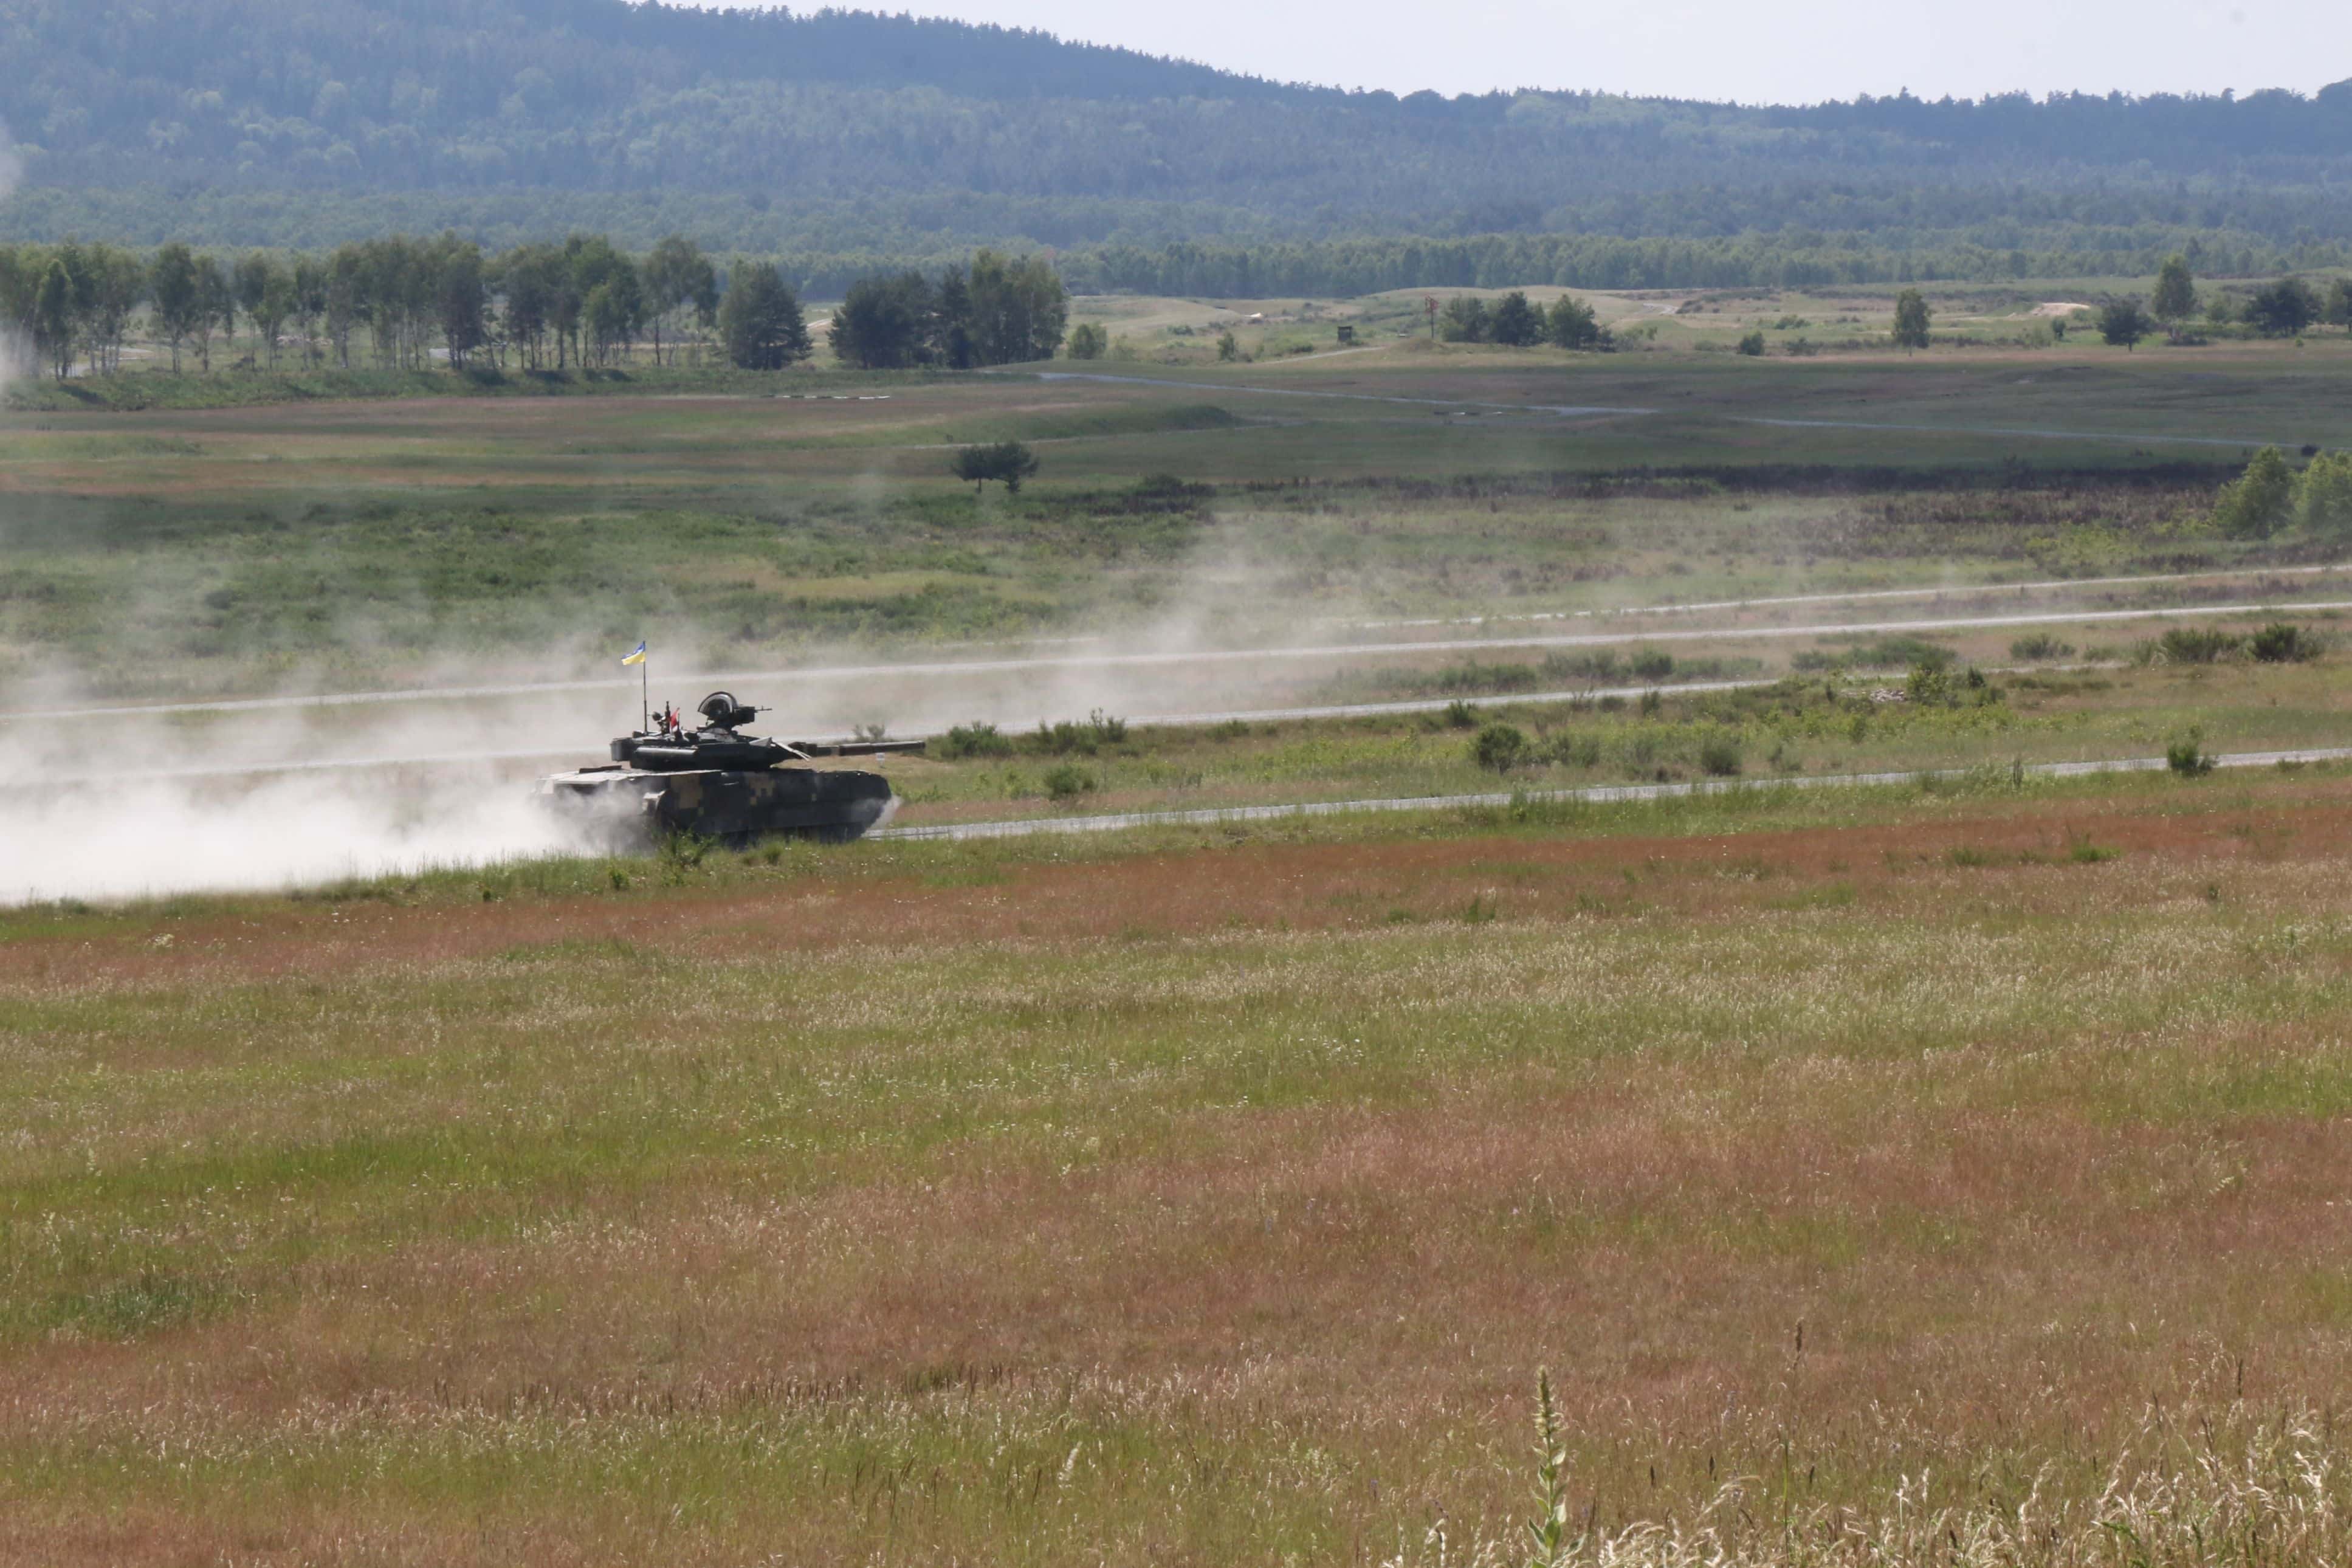 A Ukrainian T-84 tank moves down range on the Grafenwoehr Training Area's Range 117 to conduct the offensive operations lane during the 2018 Strong Europe Tank Challenge, June 4, 2018.